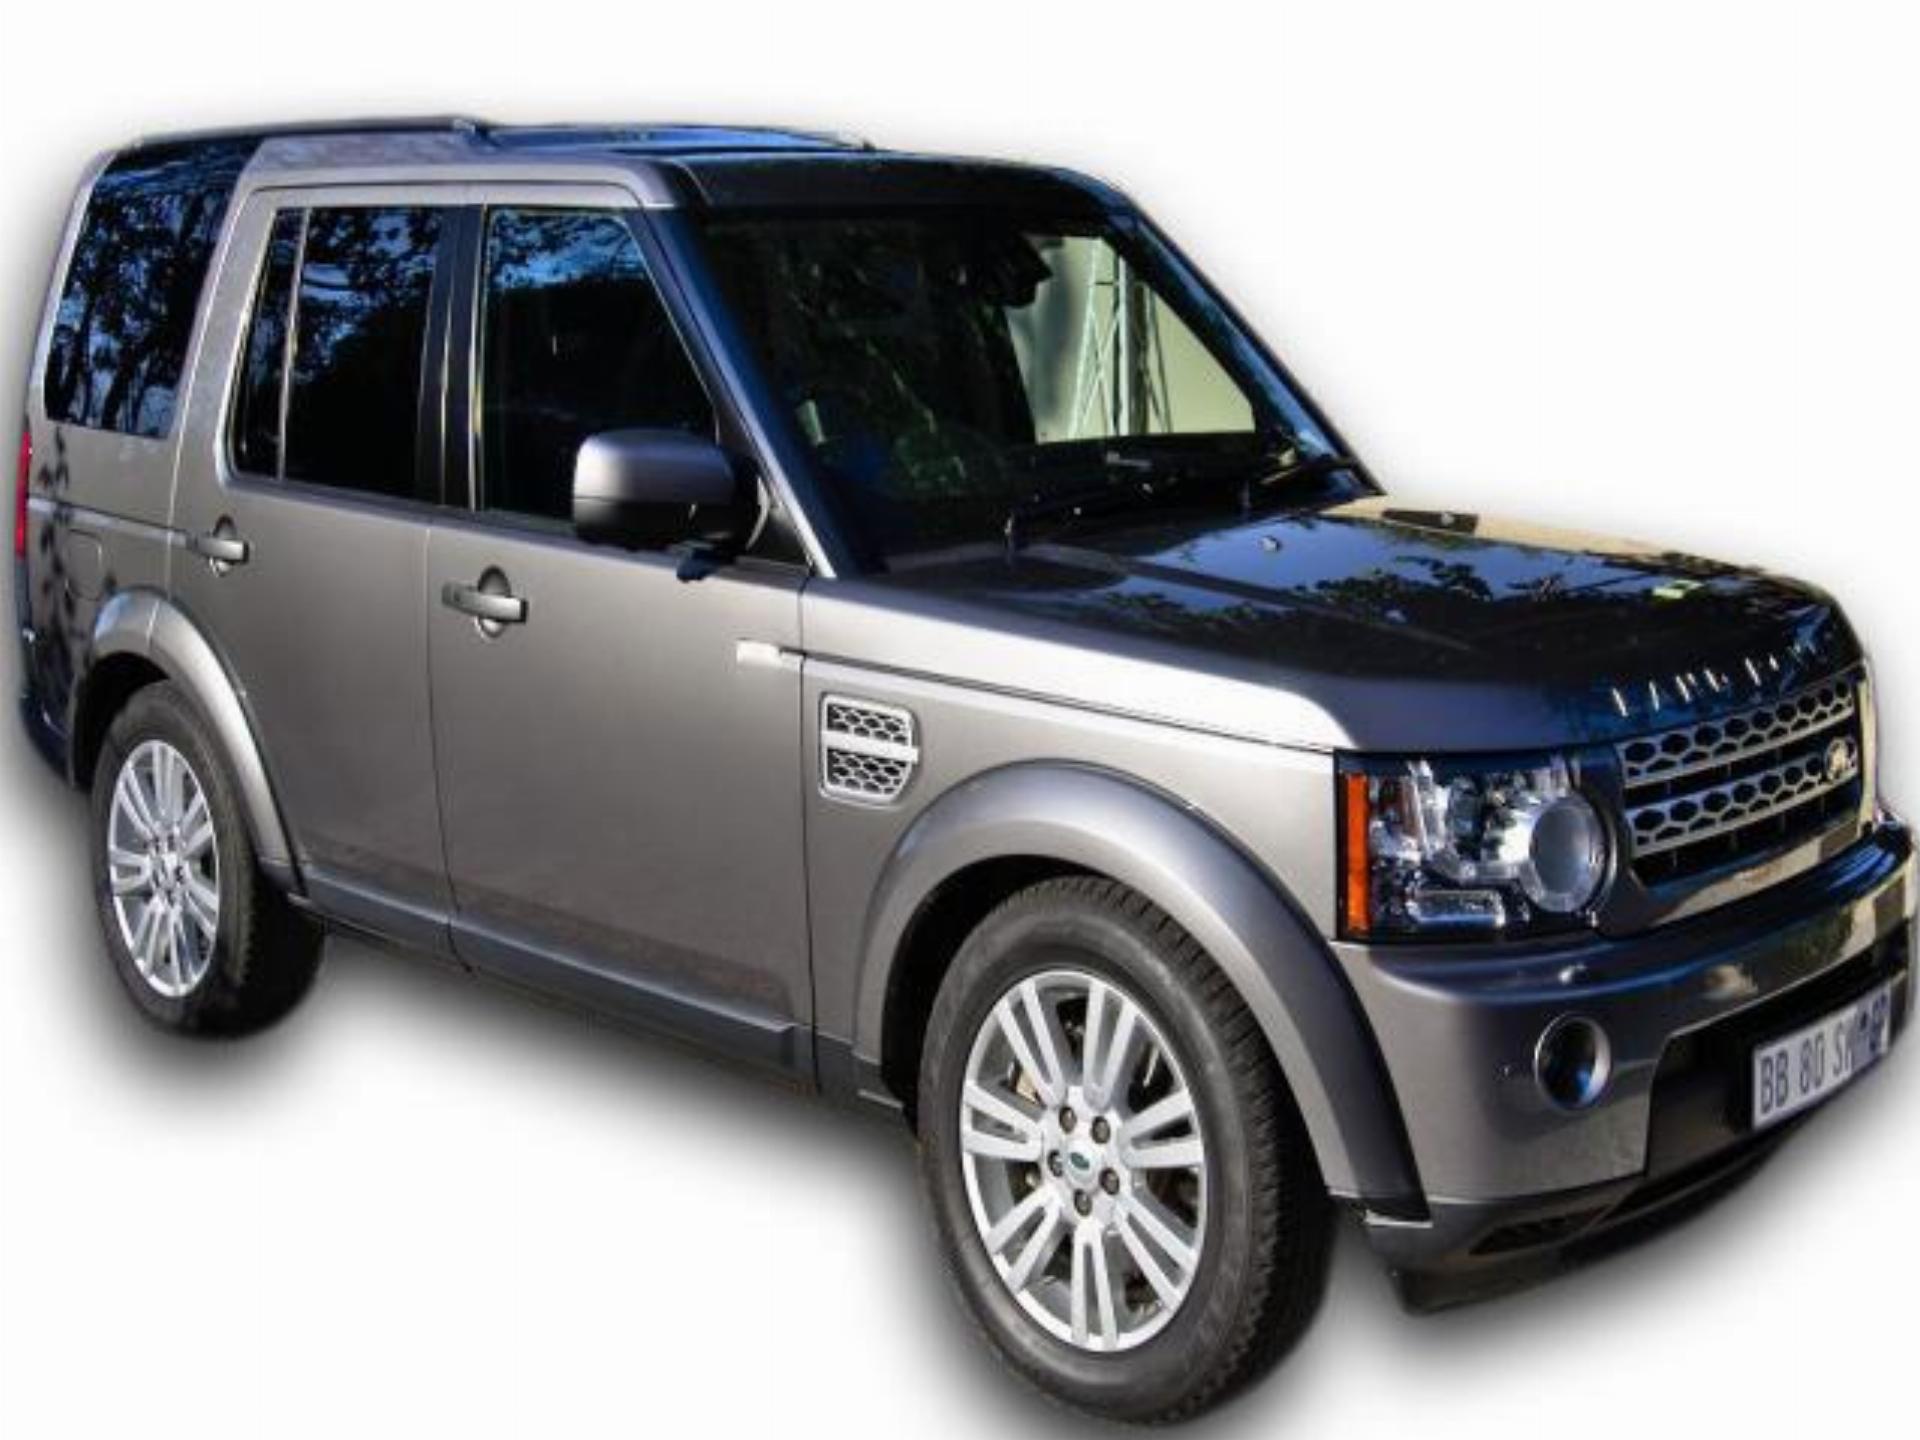 Land Rover Discovery V8 Hse 5.0